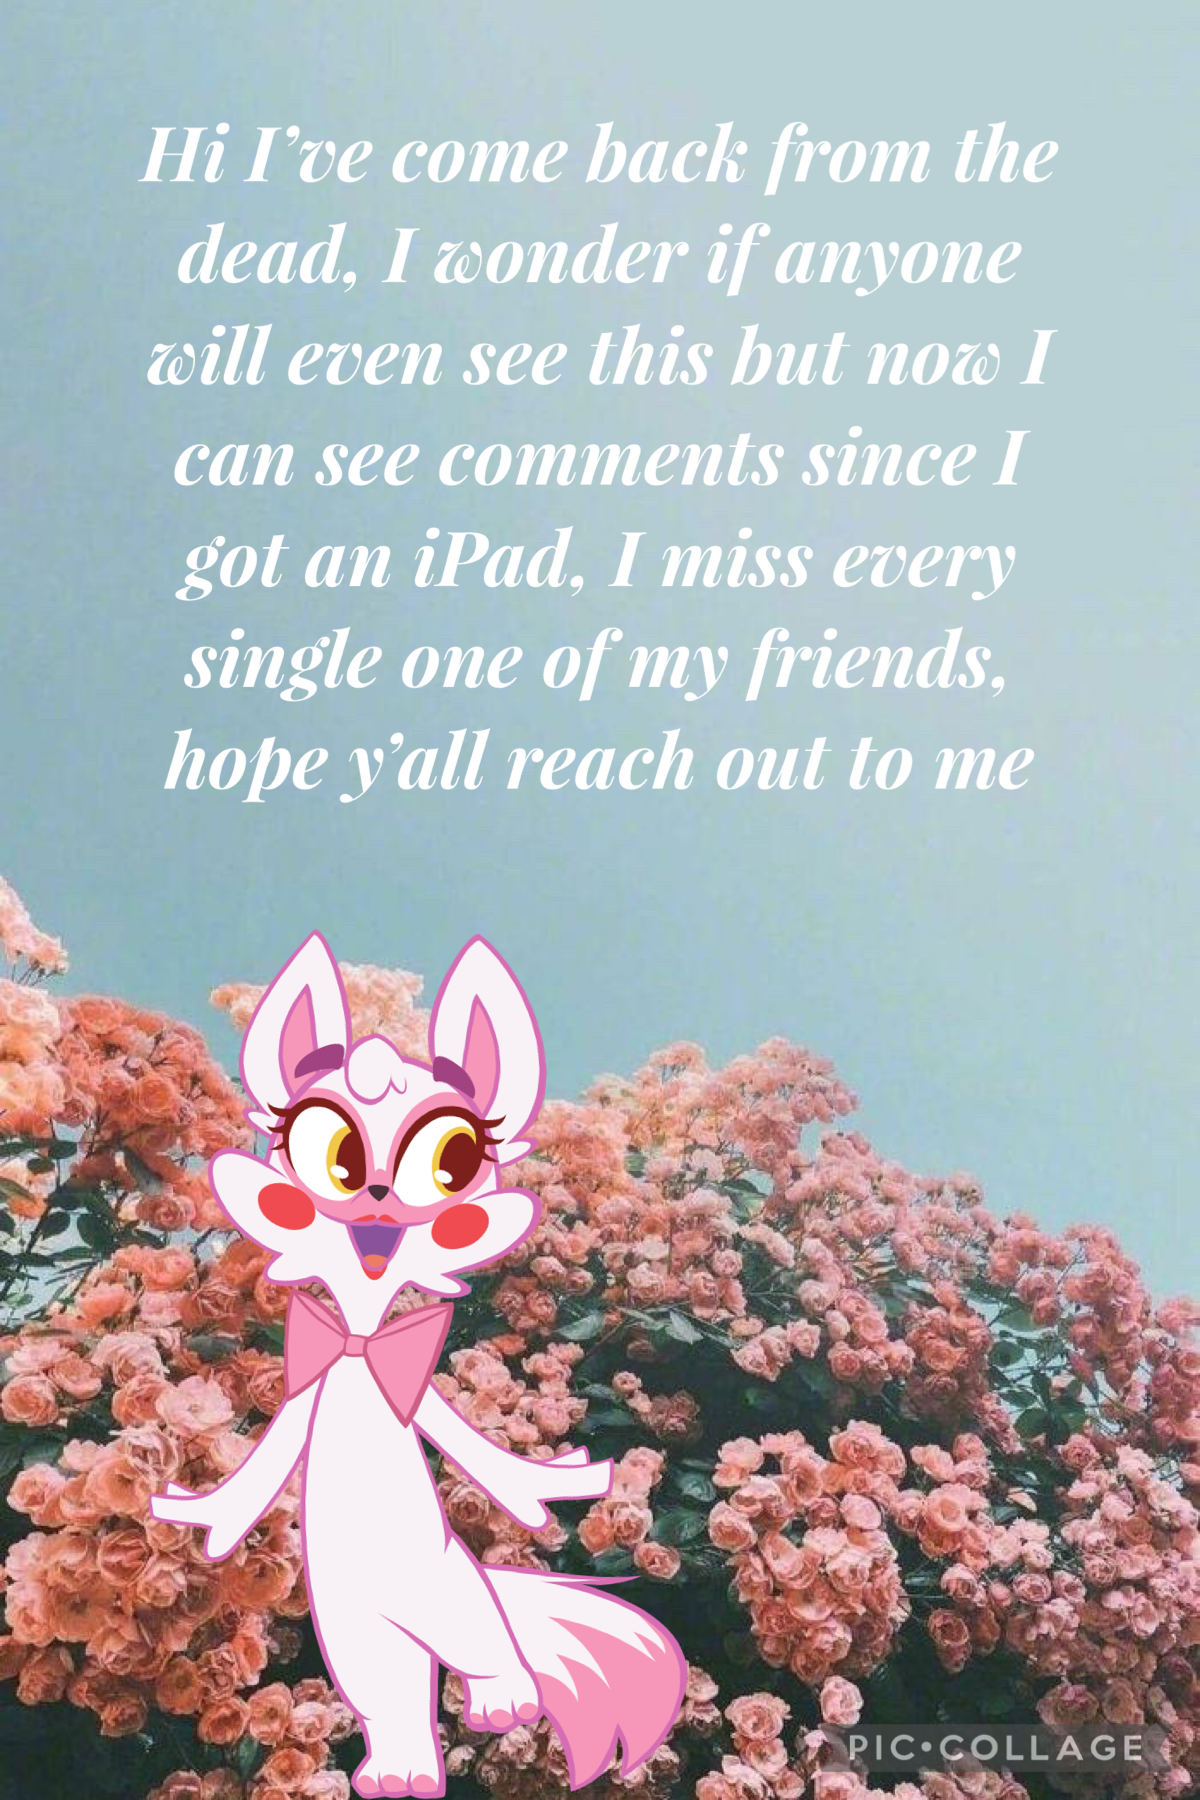 ✨Tap✨
I’ve miss all my friends I hope they are still here, I wish to talk to them again, I love you all💕